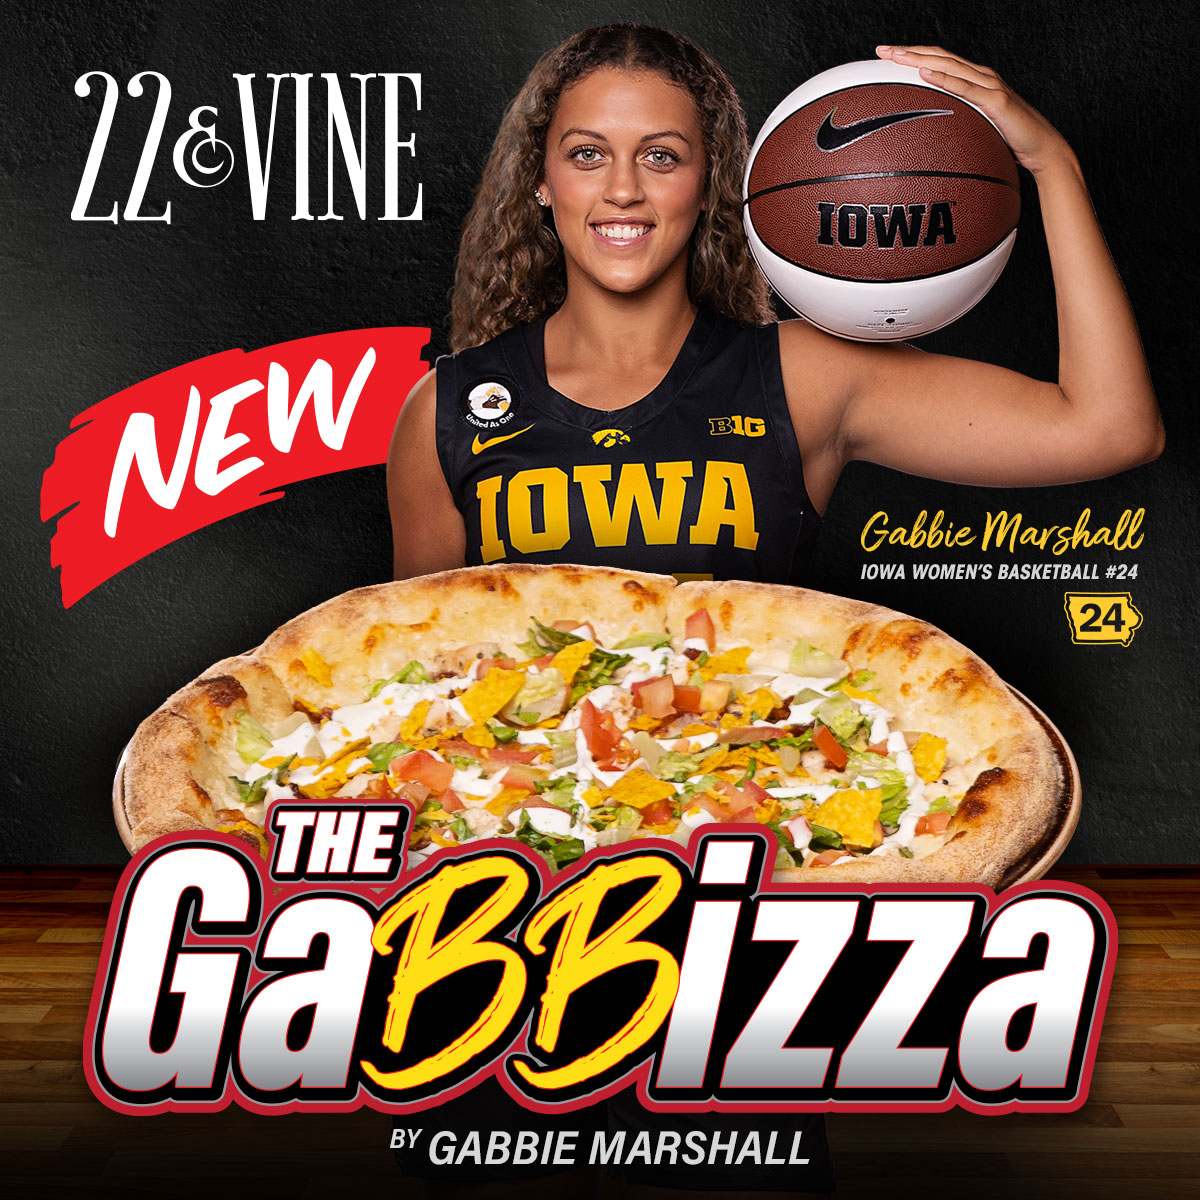 22 & Vine's pizza 'The Gabbizza' graduates Friday, May 31. Come in and try yourself a slice before this popular menu item is gone forever. 🍕🏀